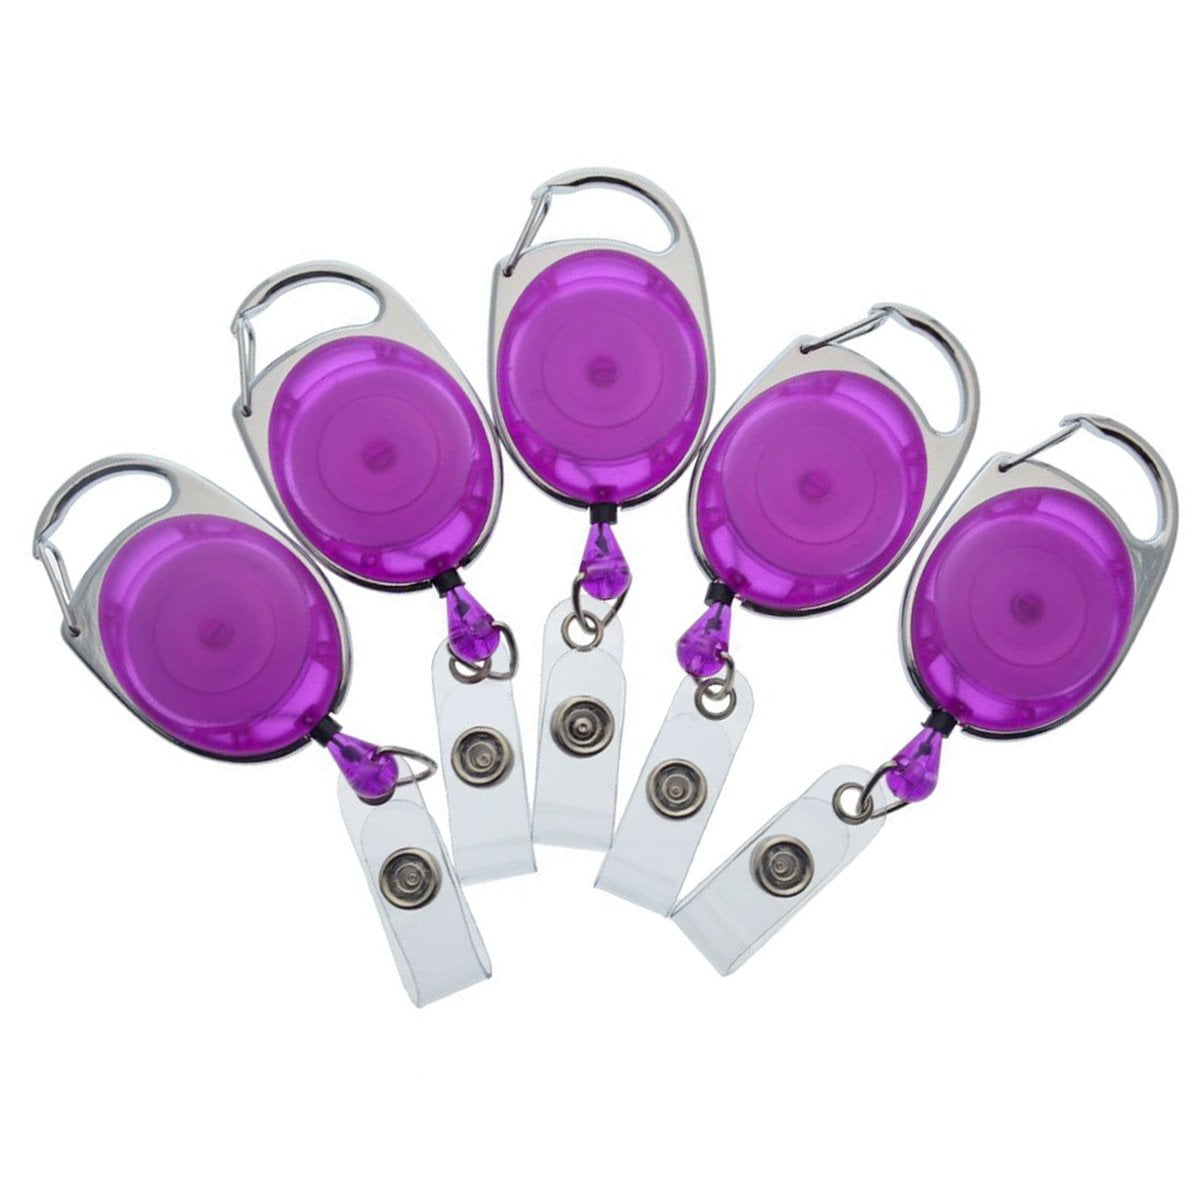  Reeleer Purple Flower Badge Reels Retractable, with Alligator  Clip and Key Ring, 24 inches Thick Pull Cord : Office Products